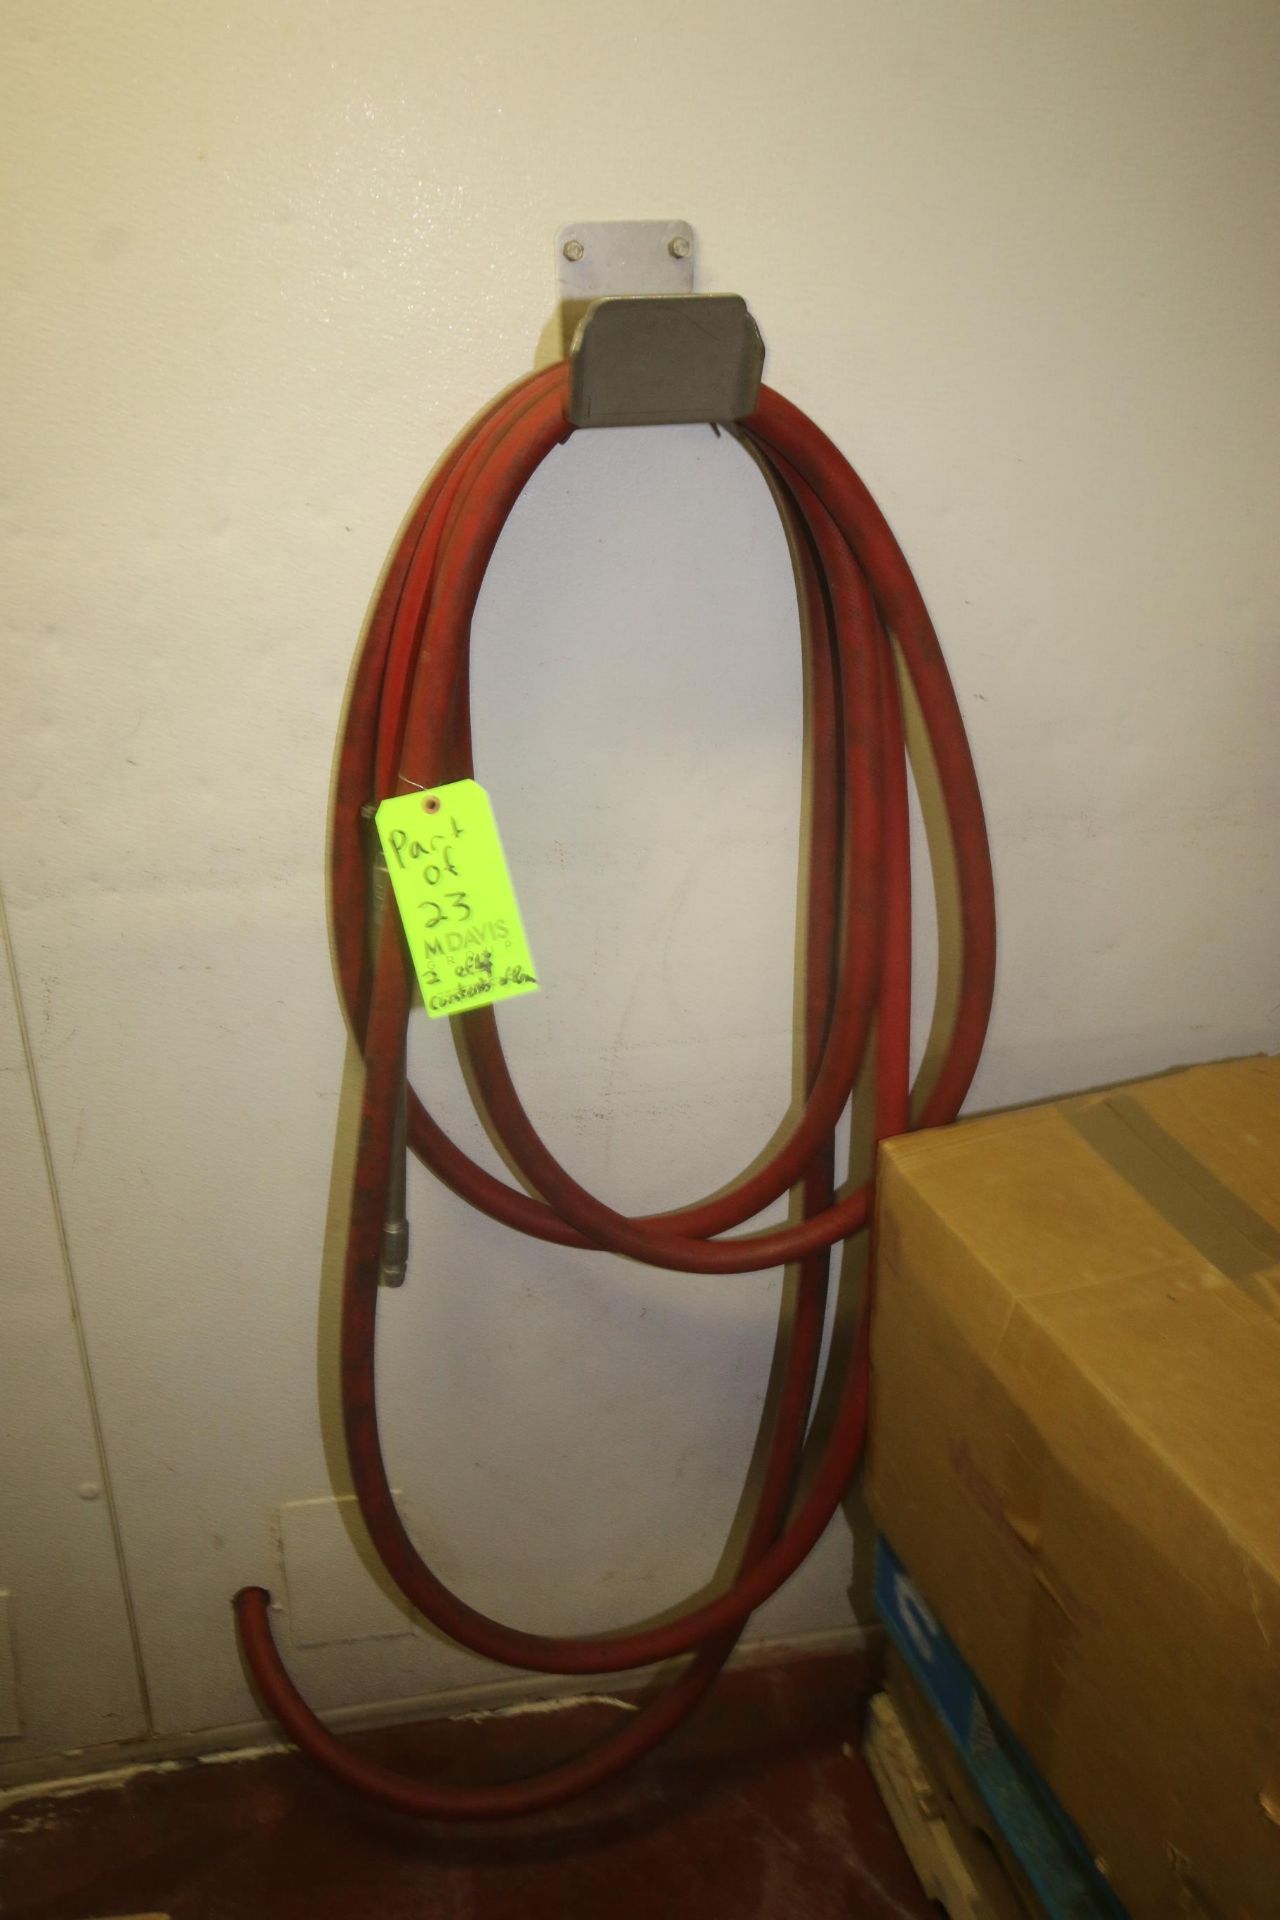 Remaining Contents of Room, Includes (3) Hoses with S/S Wall Mounted, (1) S/S Shelf Frame (Located - Image 2 of 4